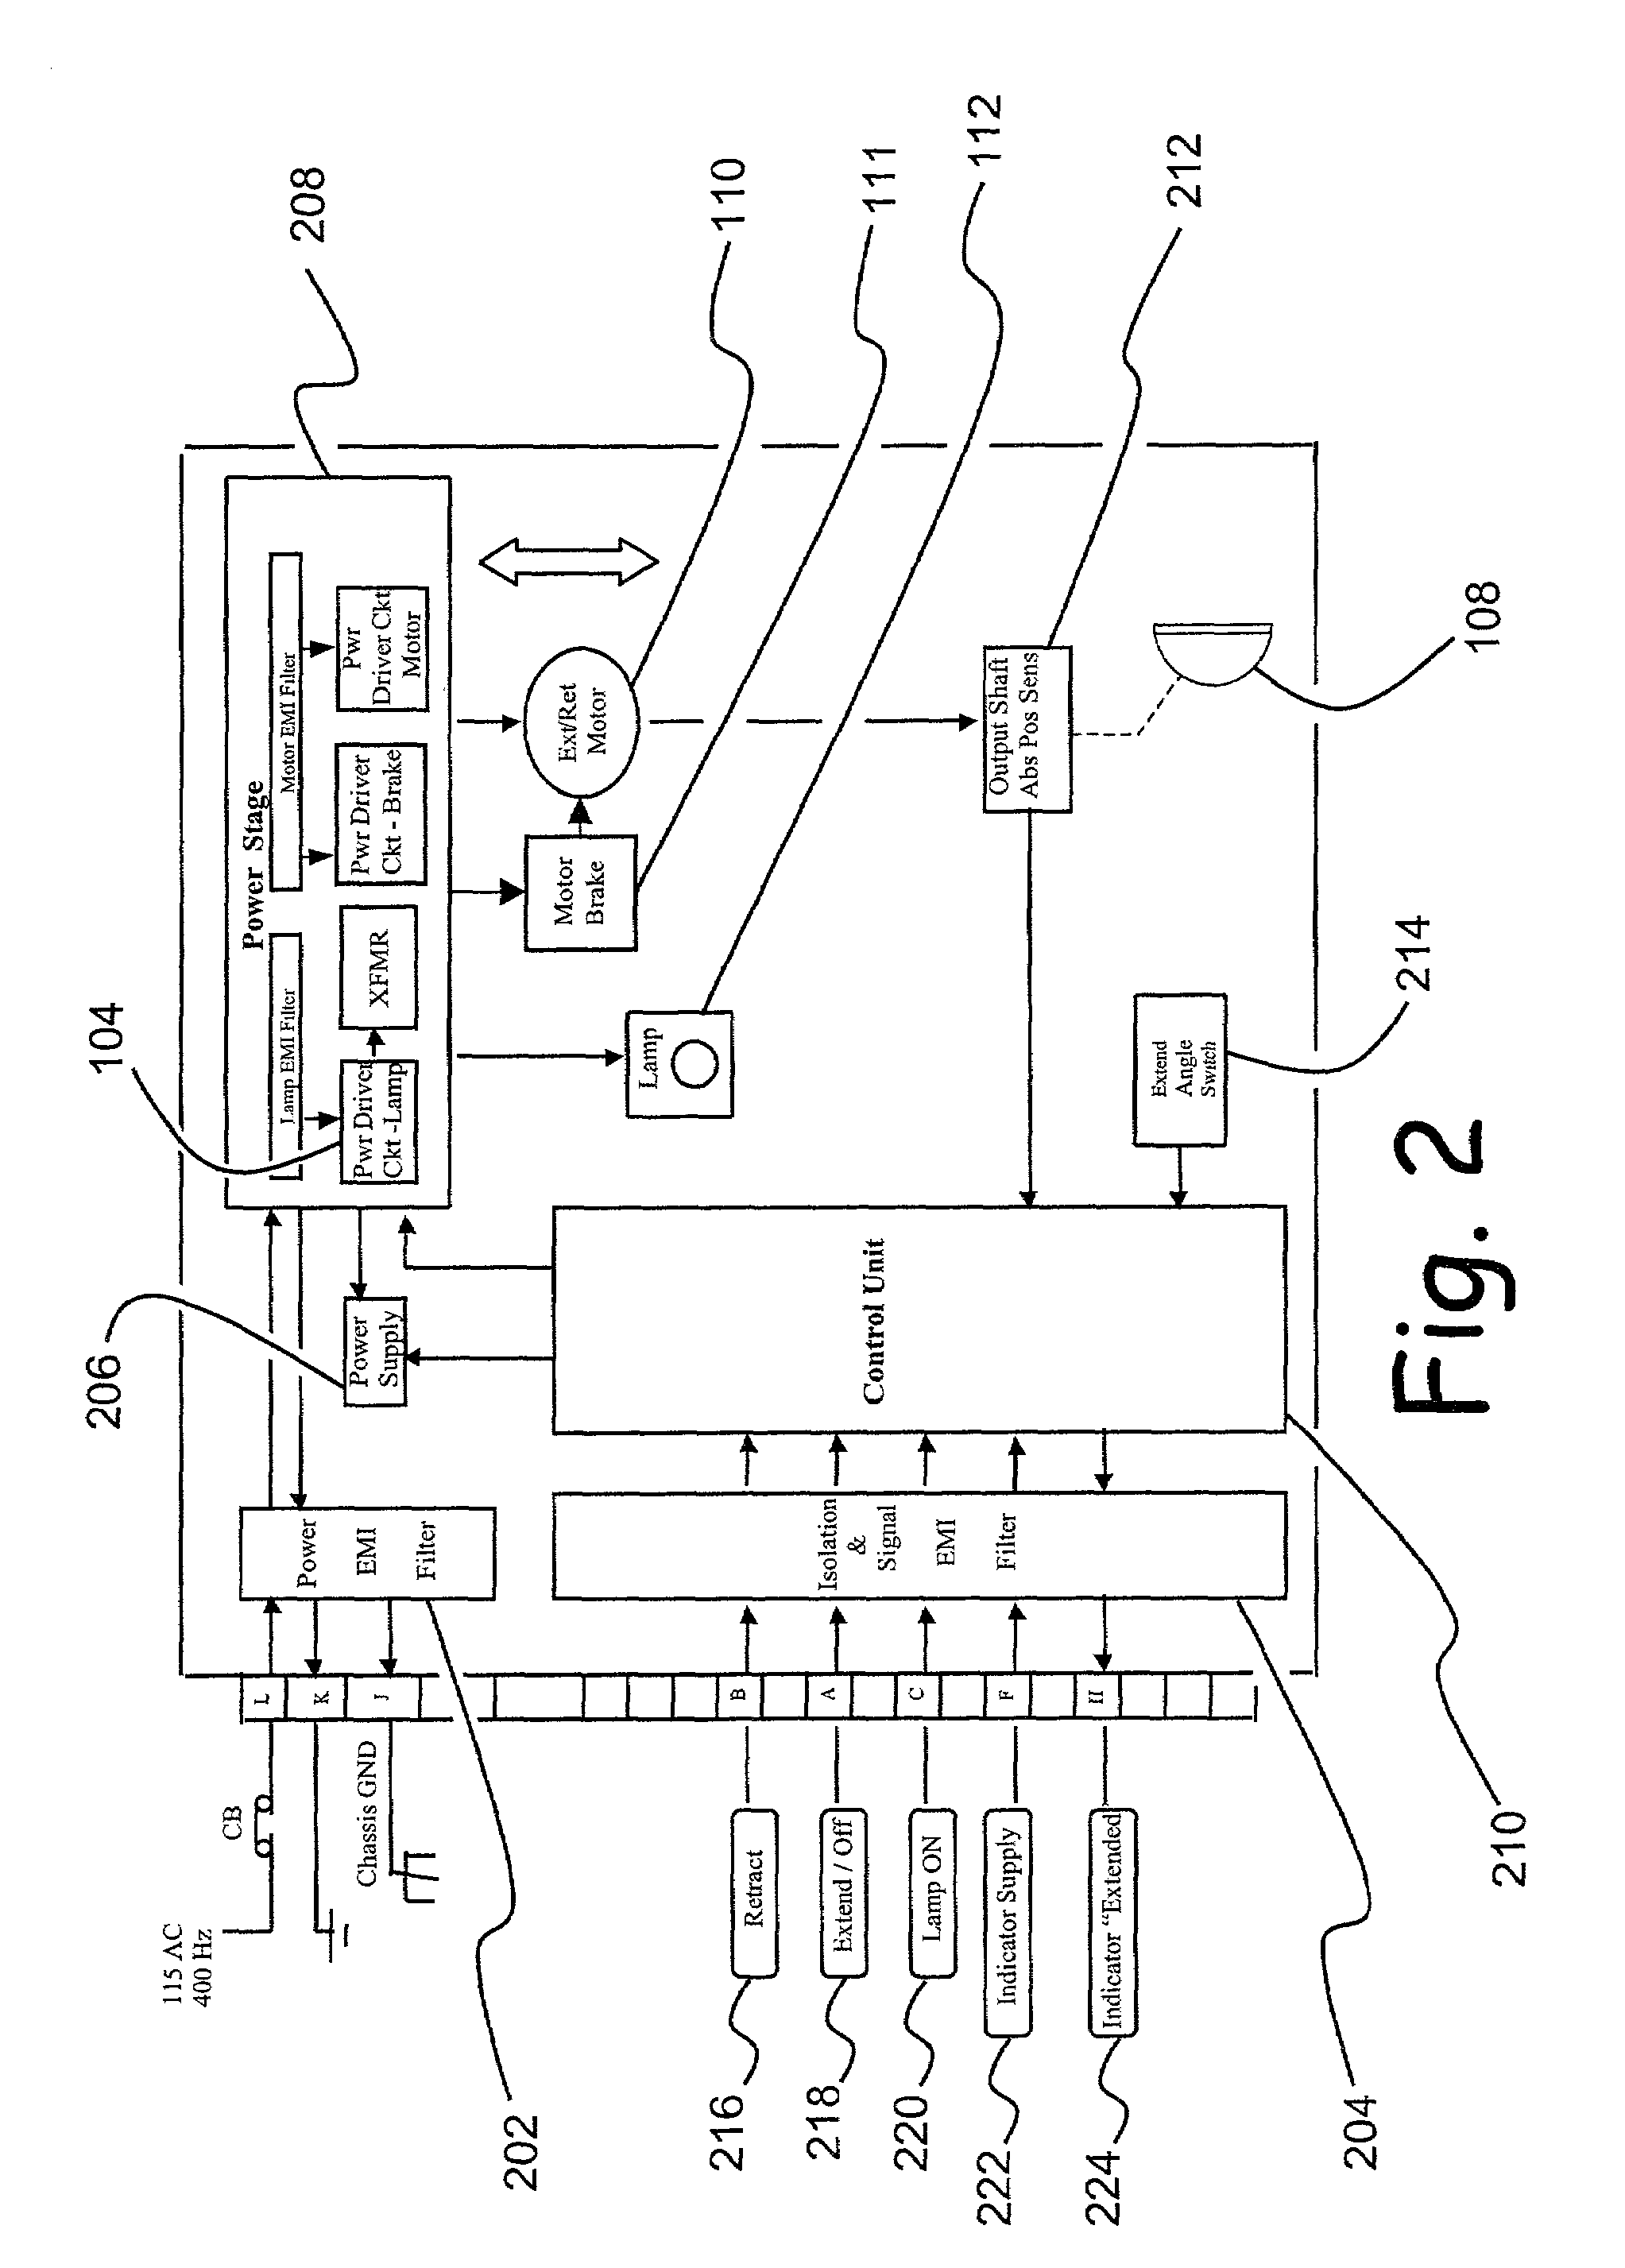 Electronically controlled aircraft retractable landing light with manual retraction capability